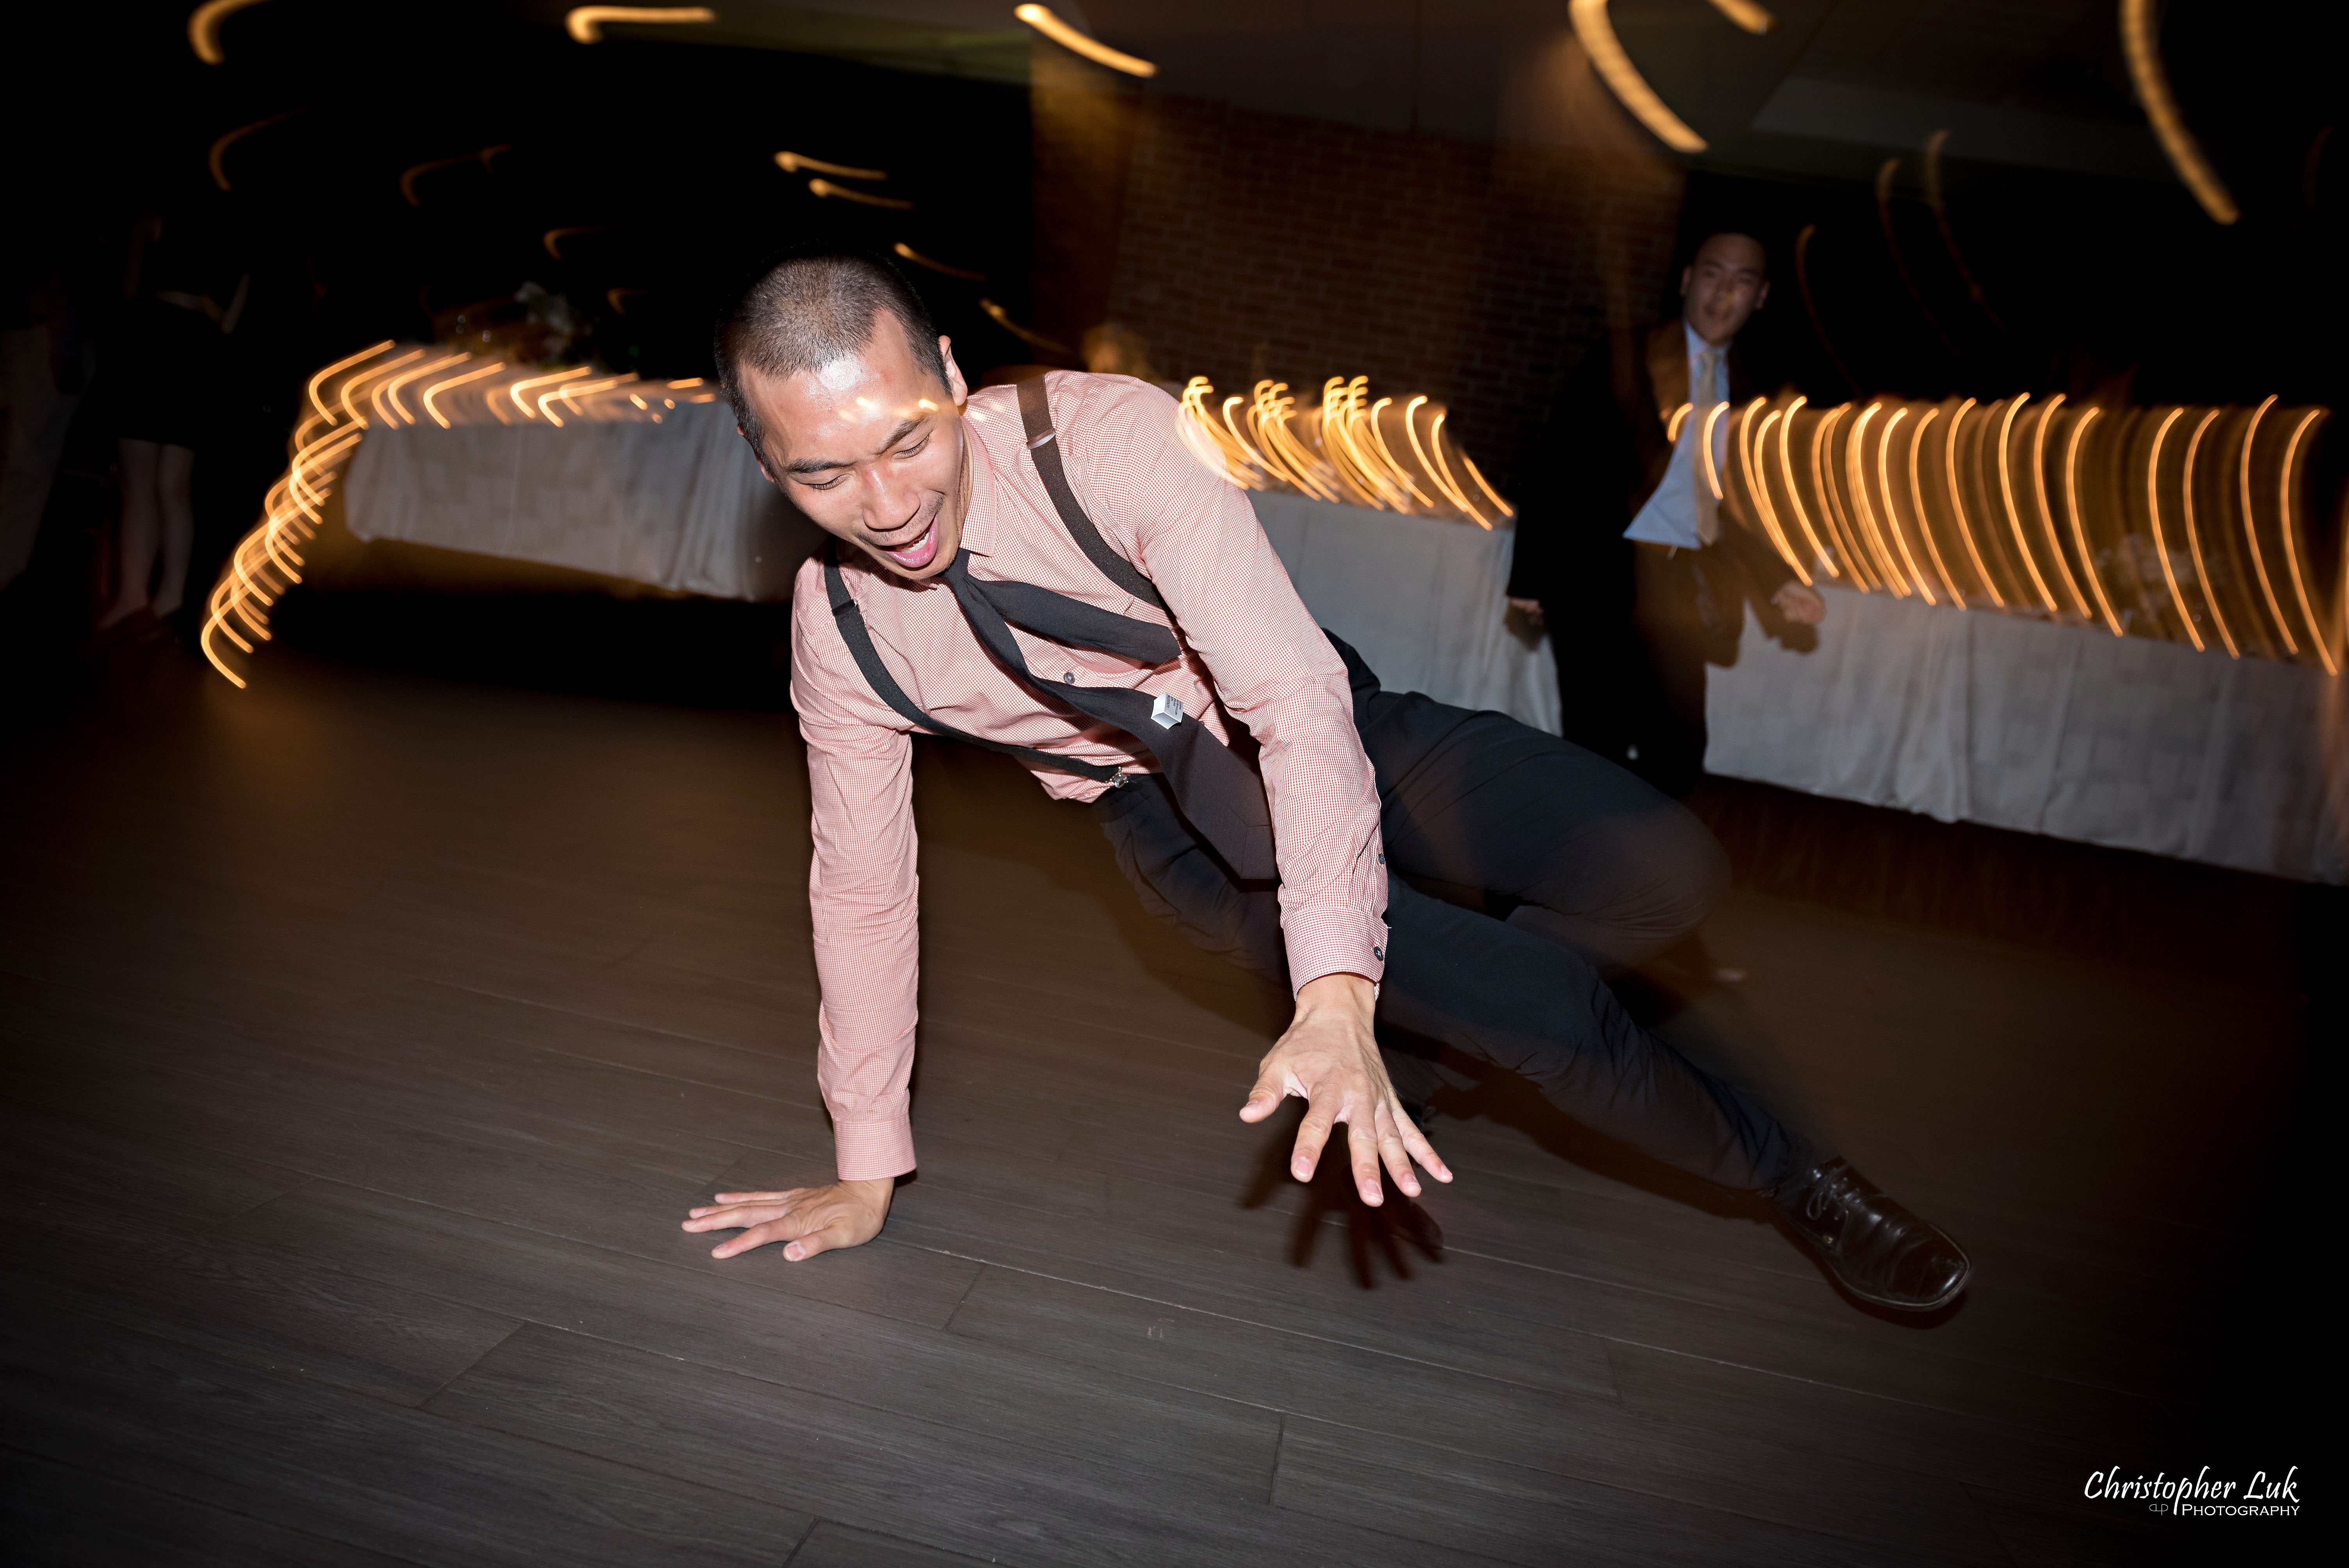 Christopher Luk - Toronto Wedding Photographer - The Manor Event Venue By Peter and Paul's - Cocktail Hour & Dinner Reception Candid Natural Photojournalistic Guests Friends Family Dancing Dance Moves Floor Fun Floor Spin Spinning